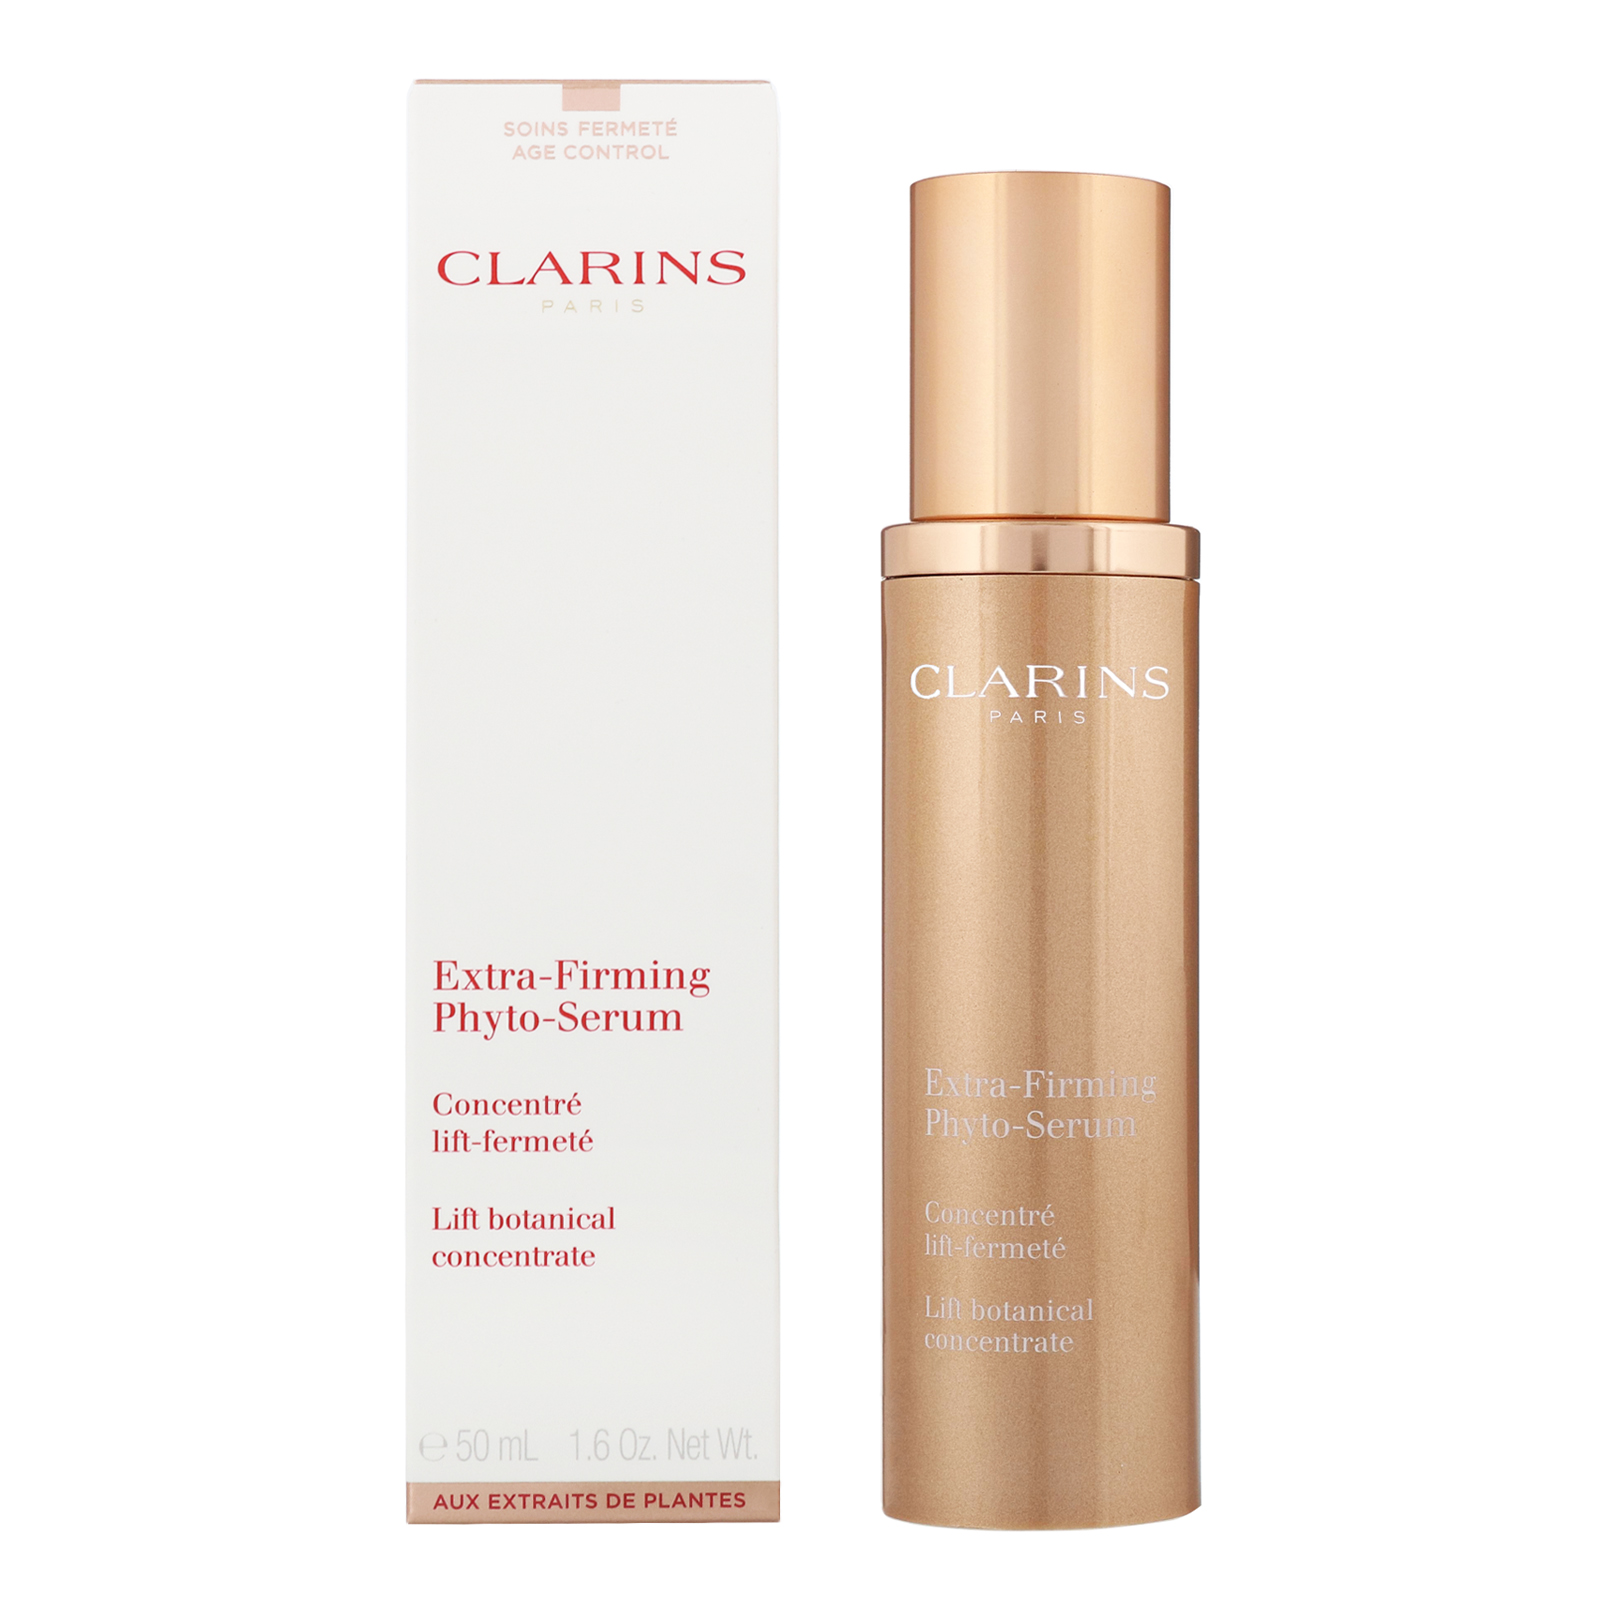 CLARINS EXTRA FIRMING FITO SERUM 50 ML @